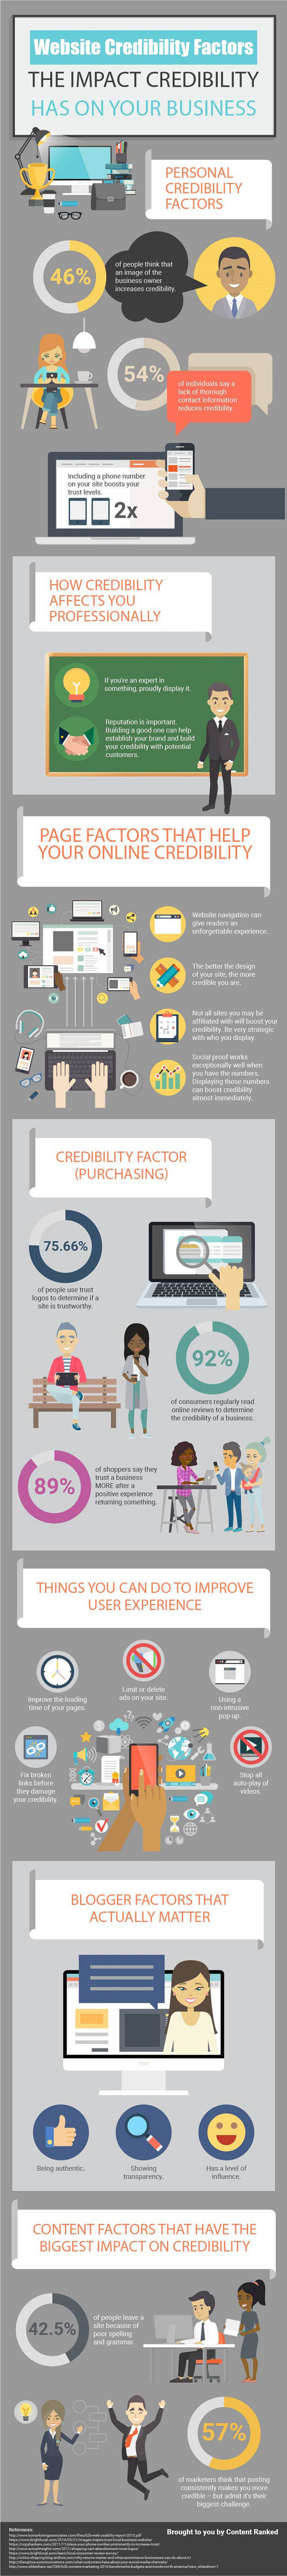 The Incredible Credible Website: How Credibility Boosts Your Business [Infographic]